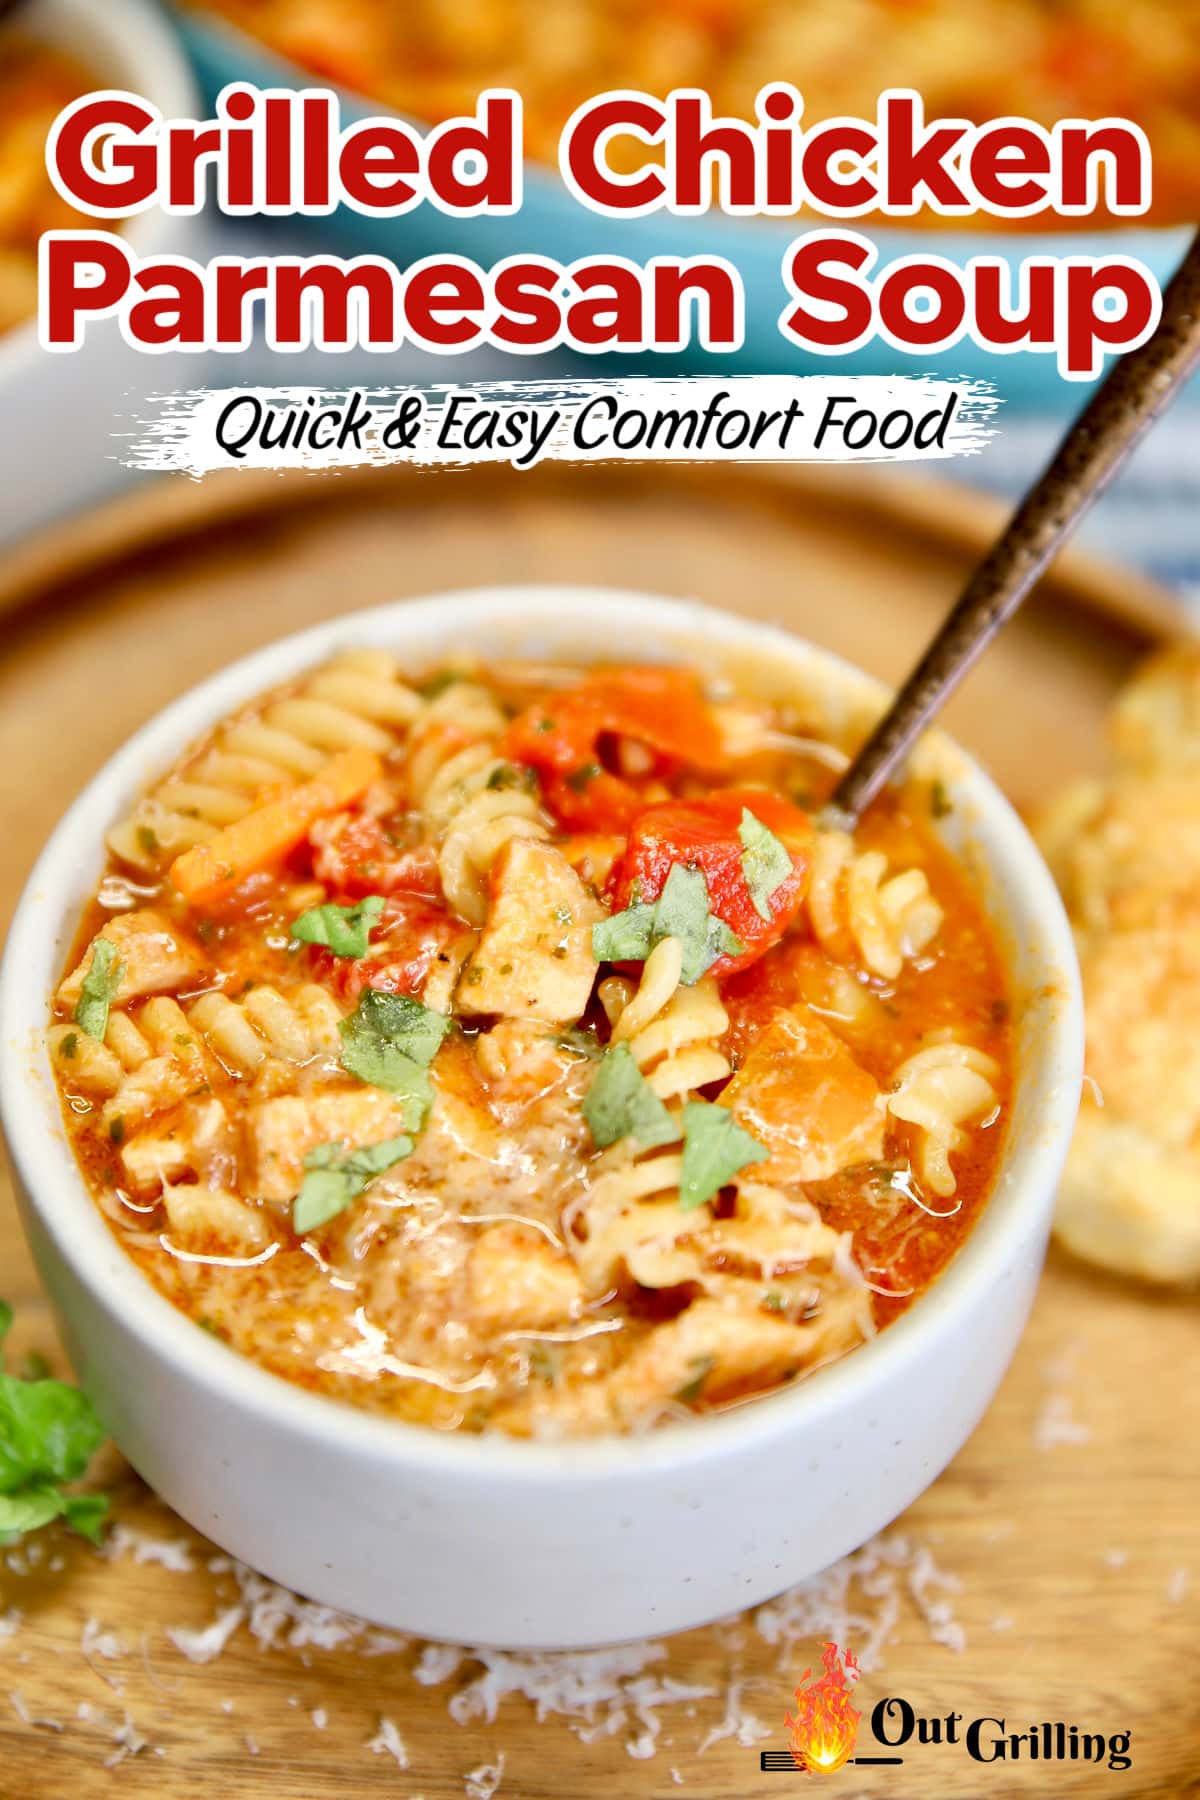 Grilled Chicken Parmesan Soup - Out Grilling